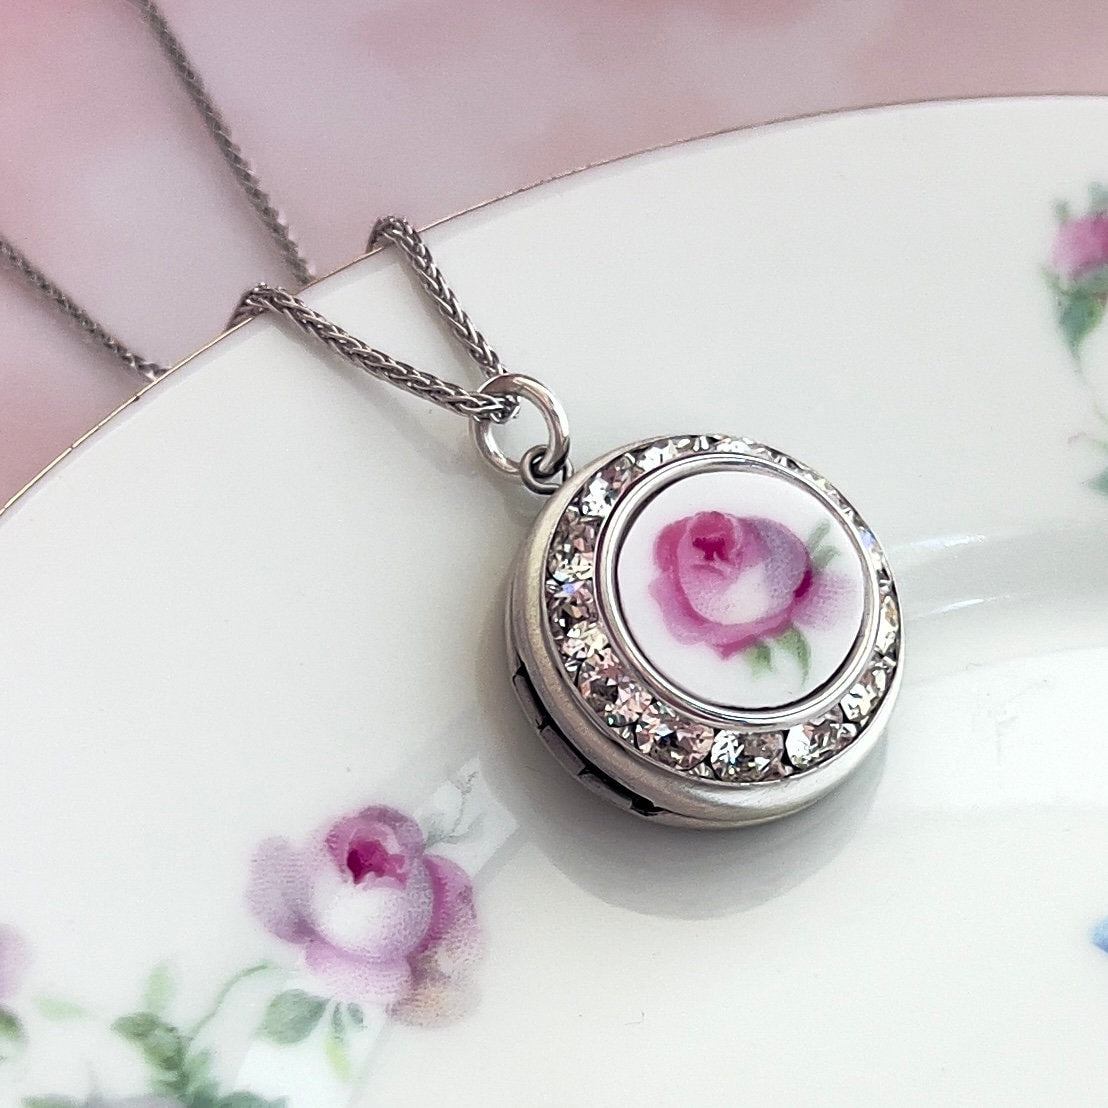 Adjustable Photo Locket Necklace, Romantic 15th Wedding Anniversary Crystal Gift for Wife, Broken China Jewelry